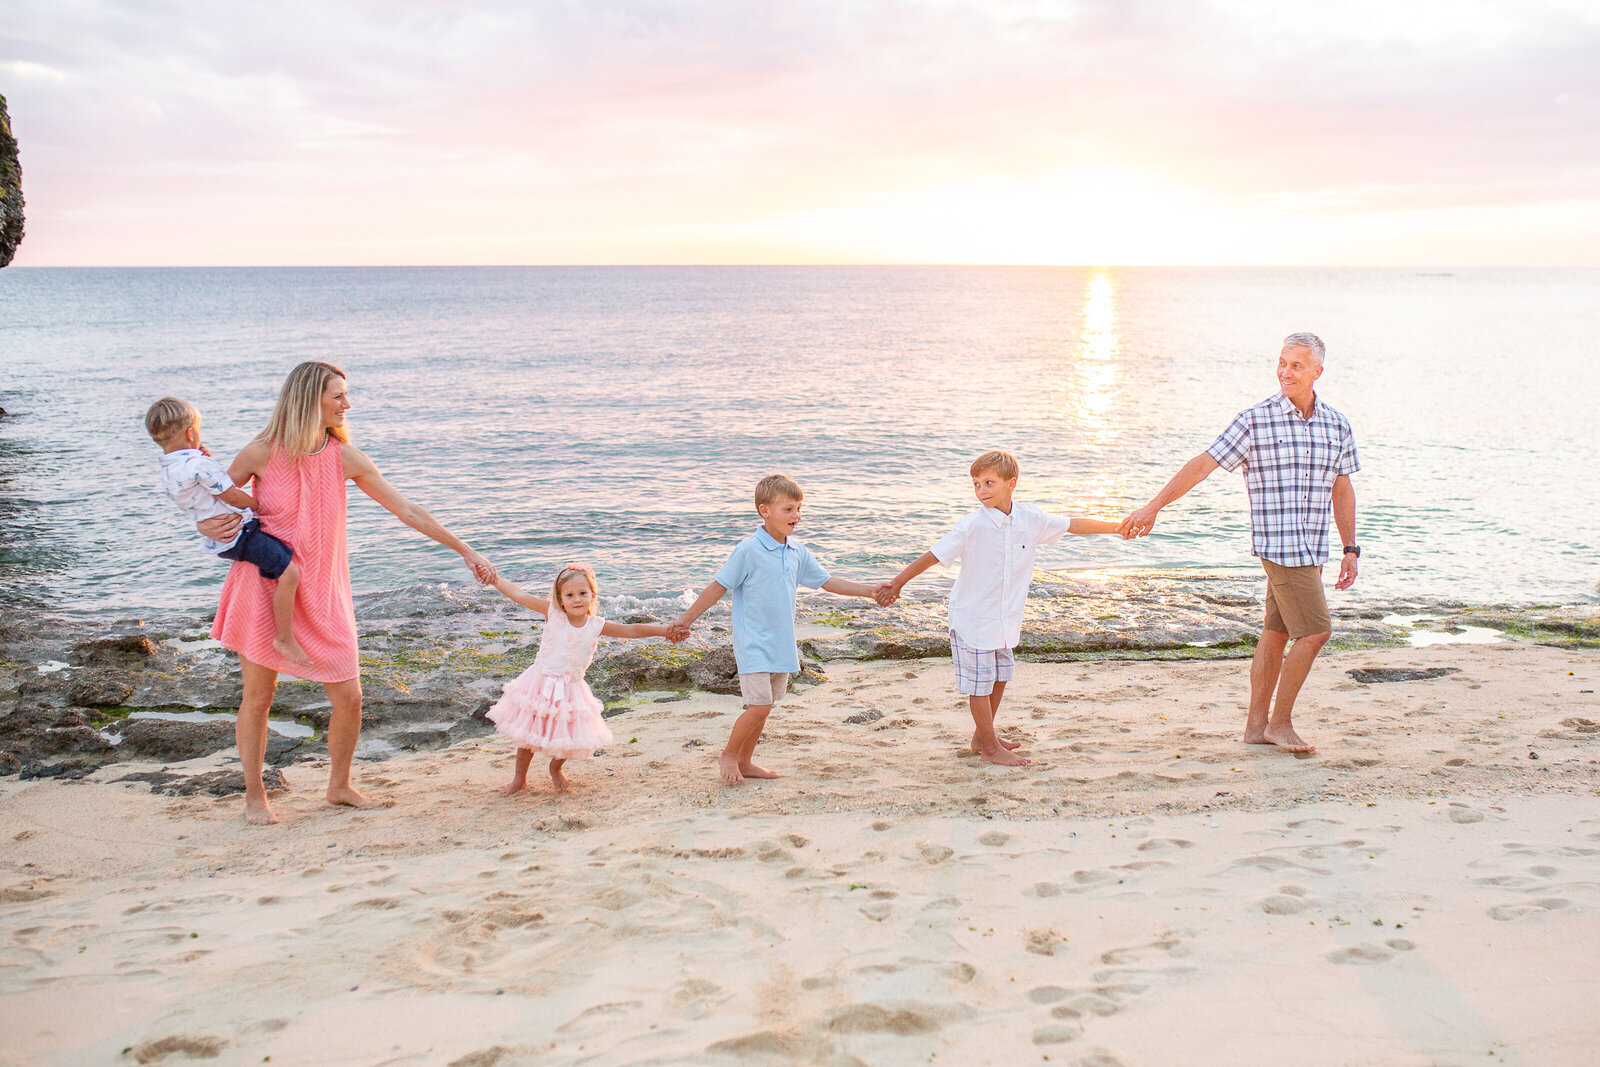 Hawaii Family Photos by Alison bell